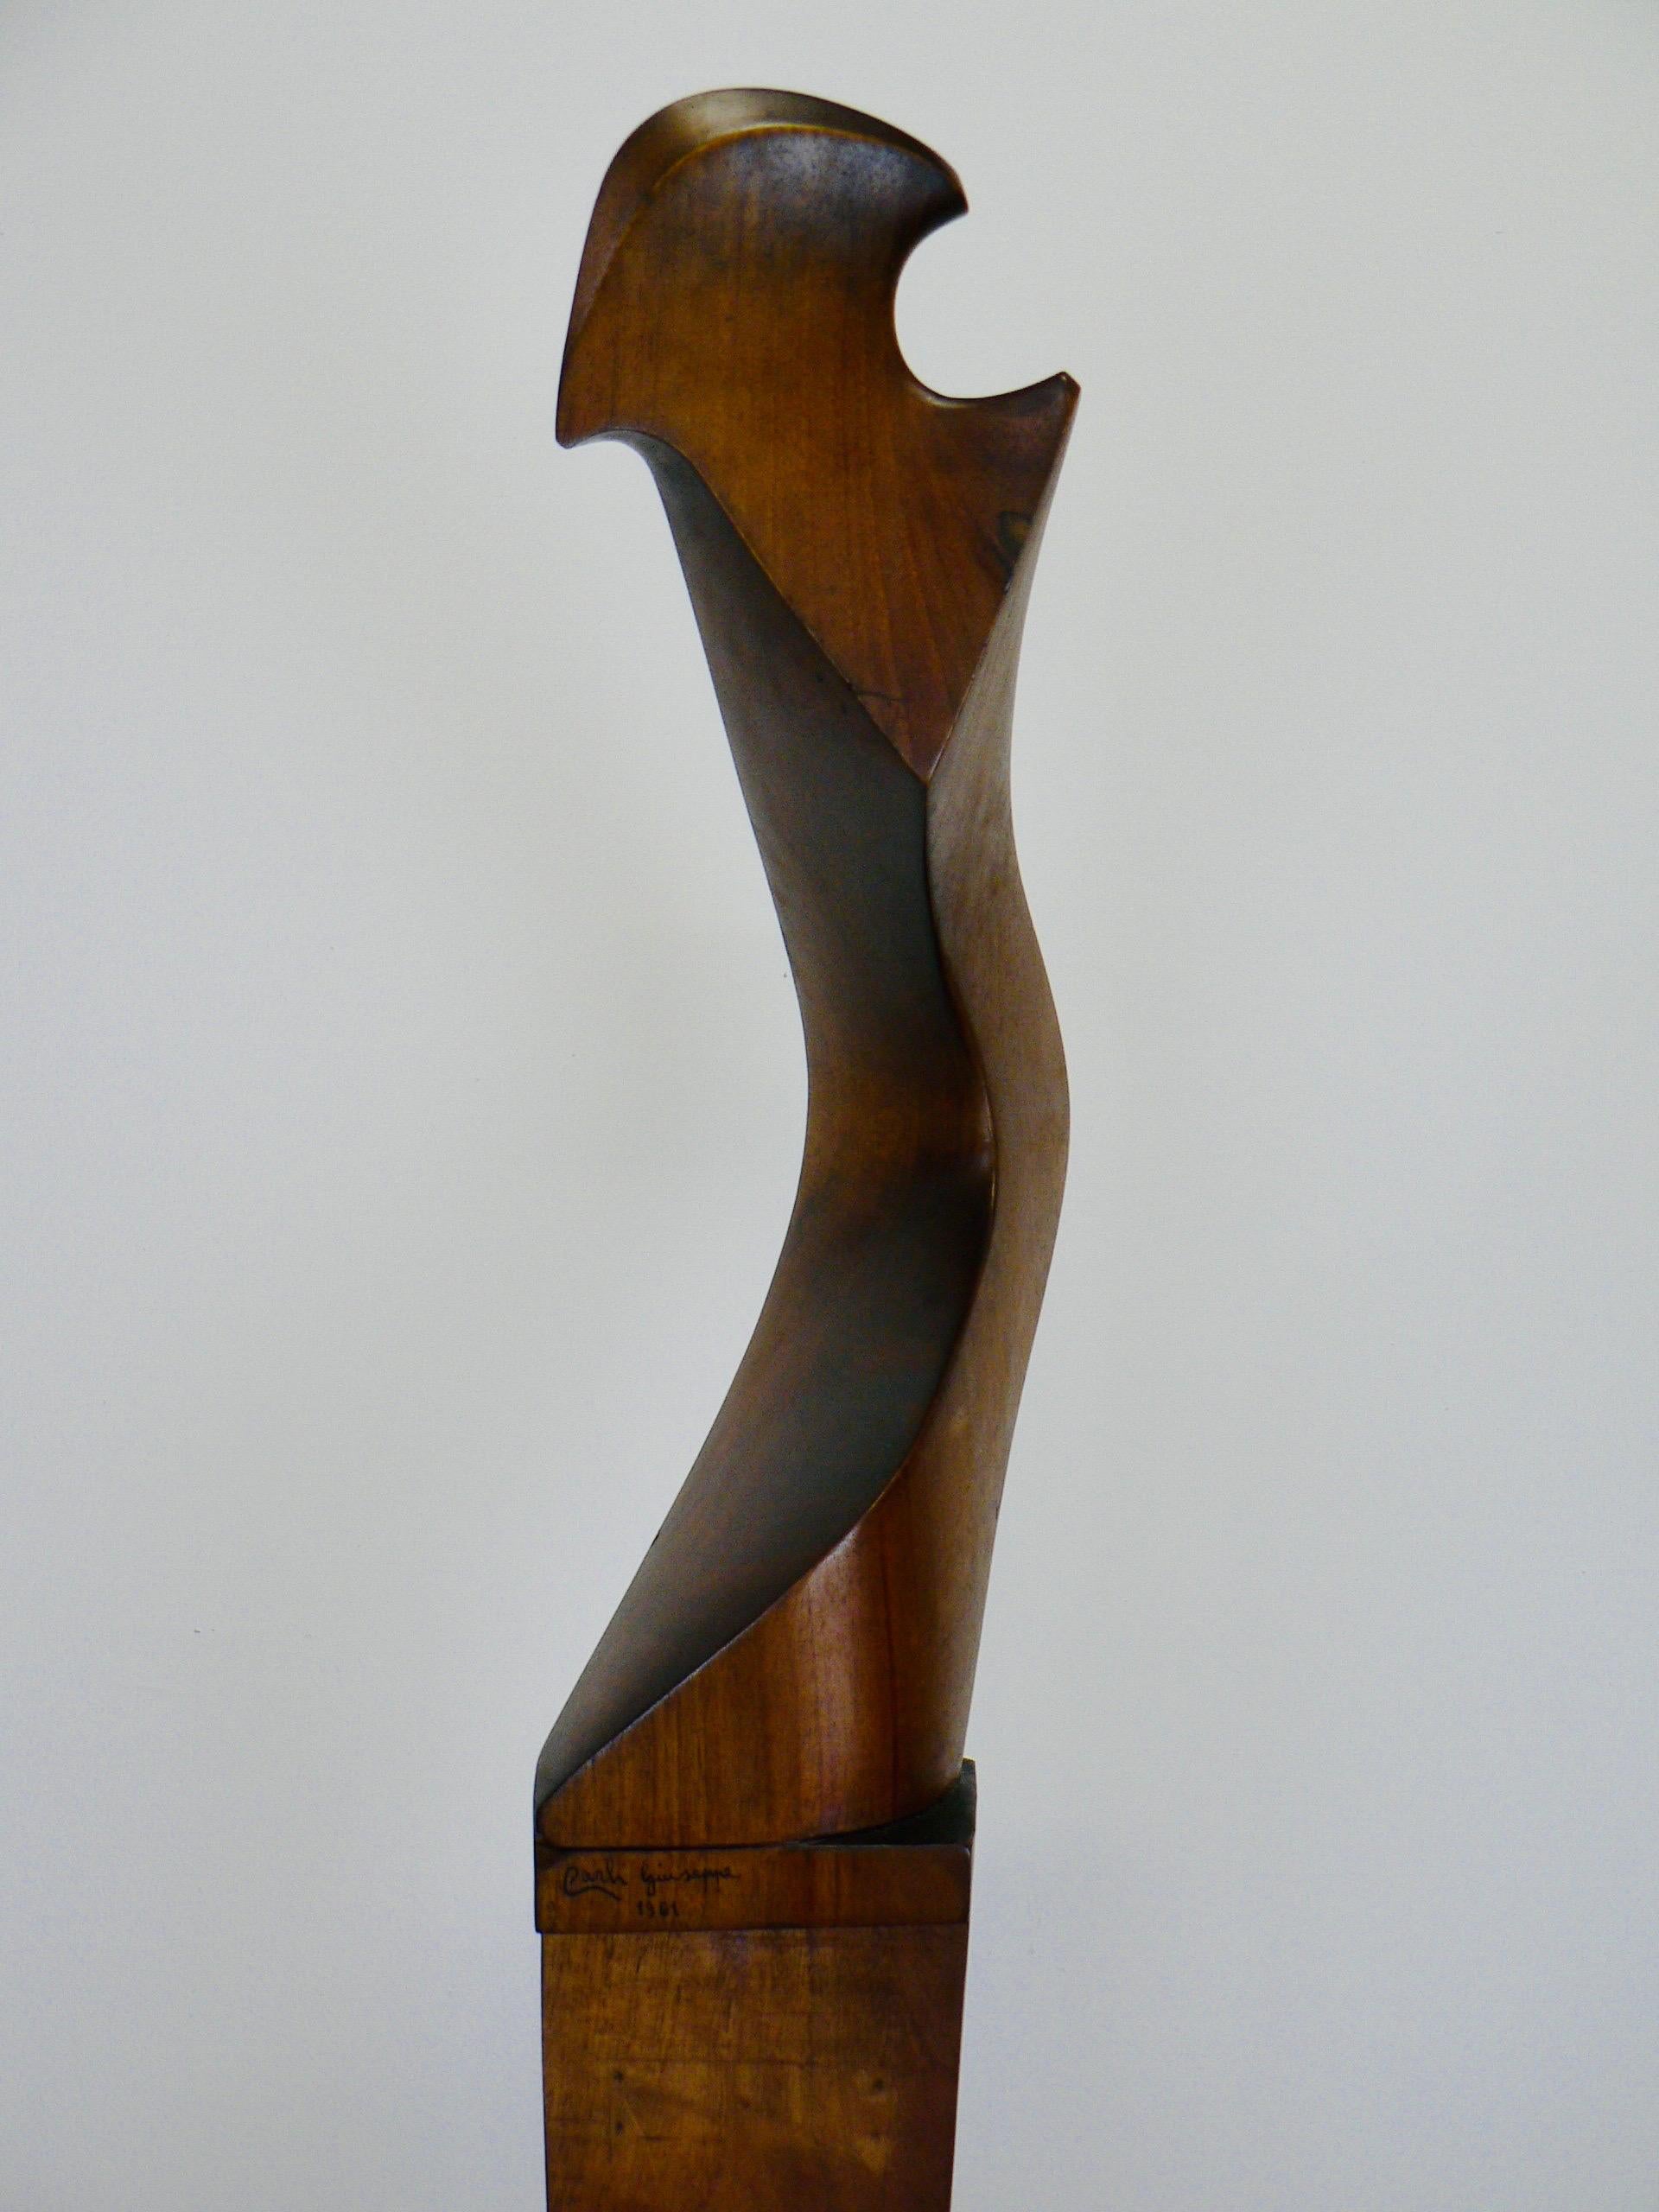 Large Venetian abstract sculpture in solid walnut by Giuseppe Carli - 1961 For Sale 2